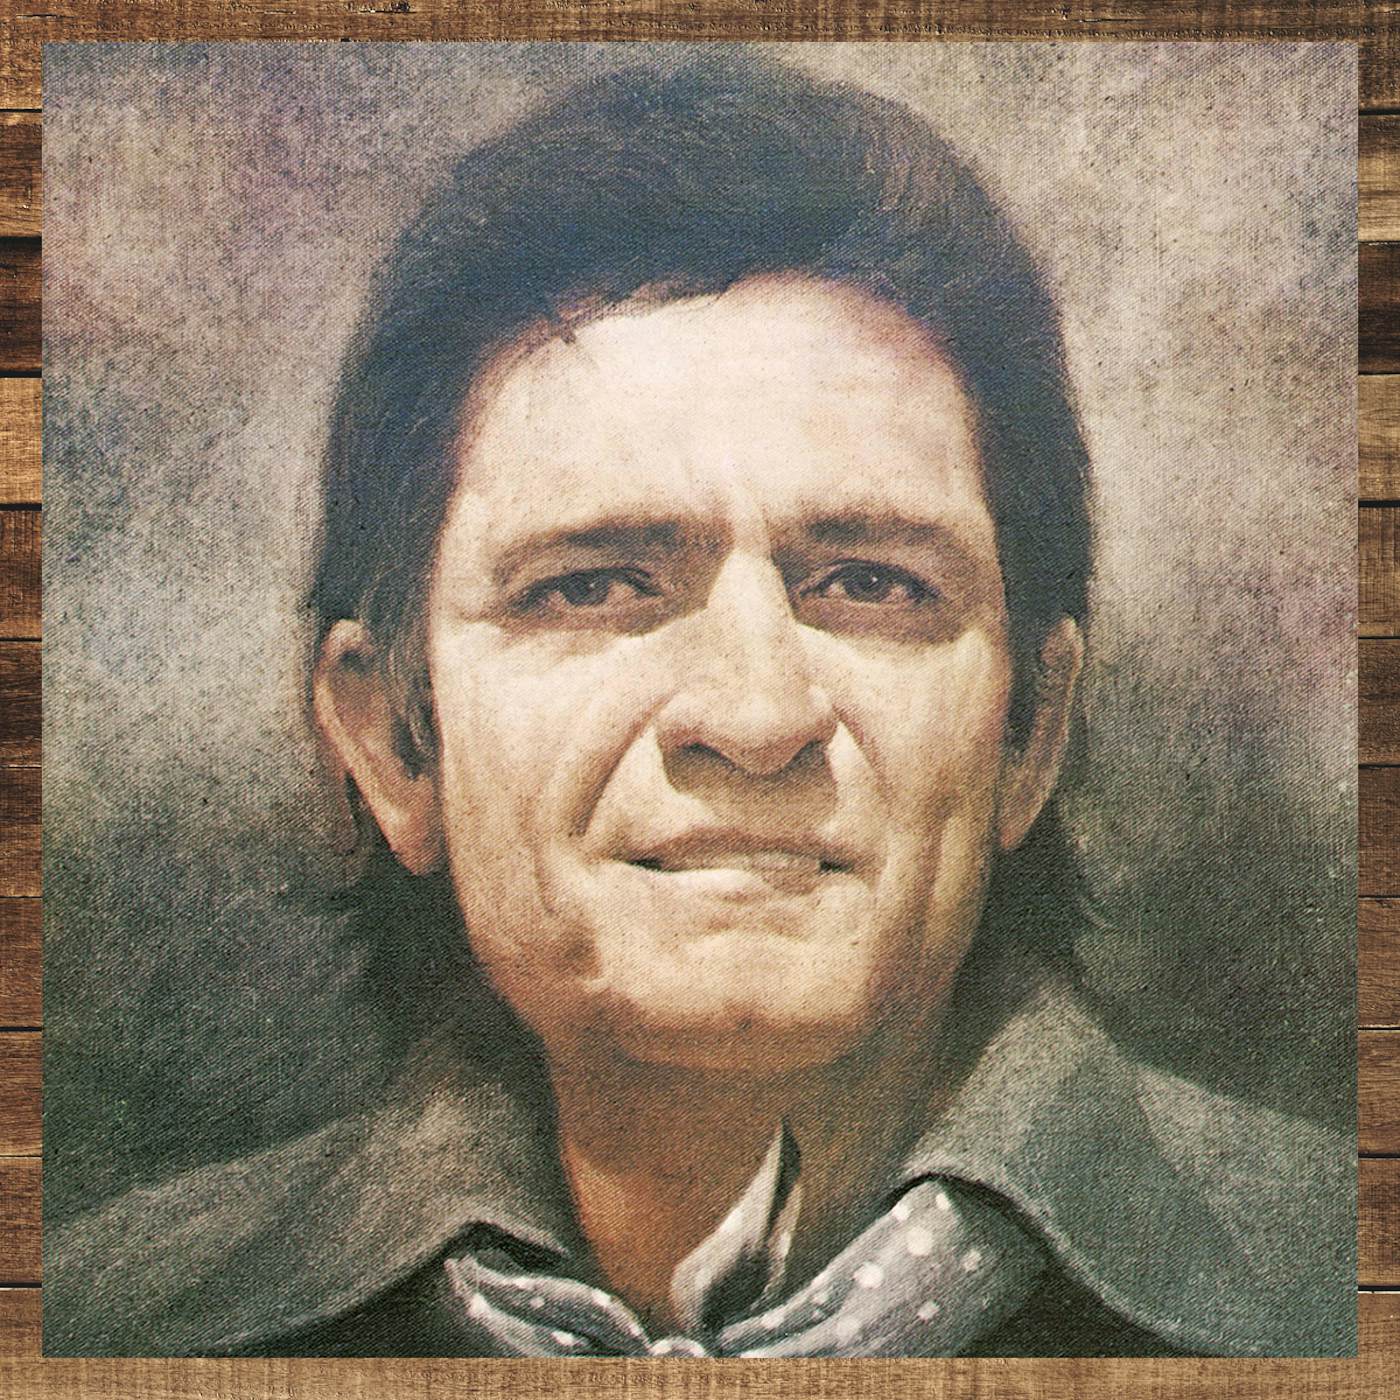 The Johnny Cash Collection - His Greatest Hits, Volume II Vinyl